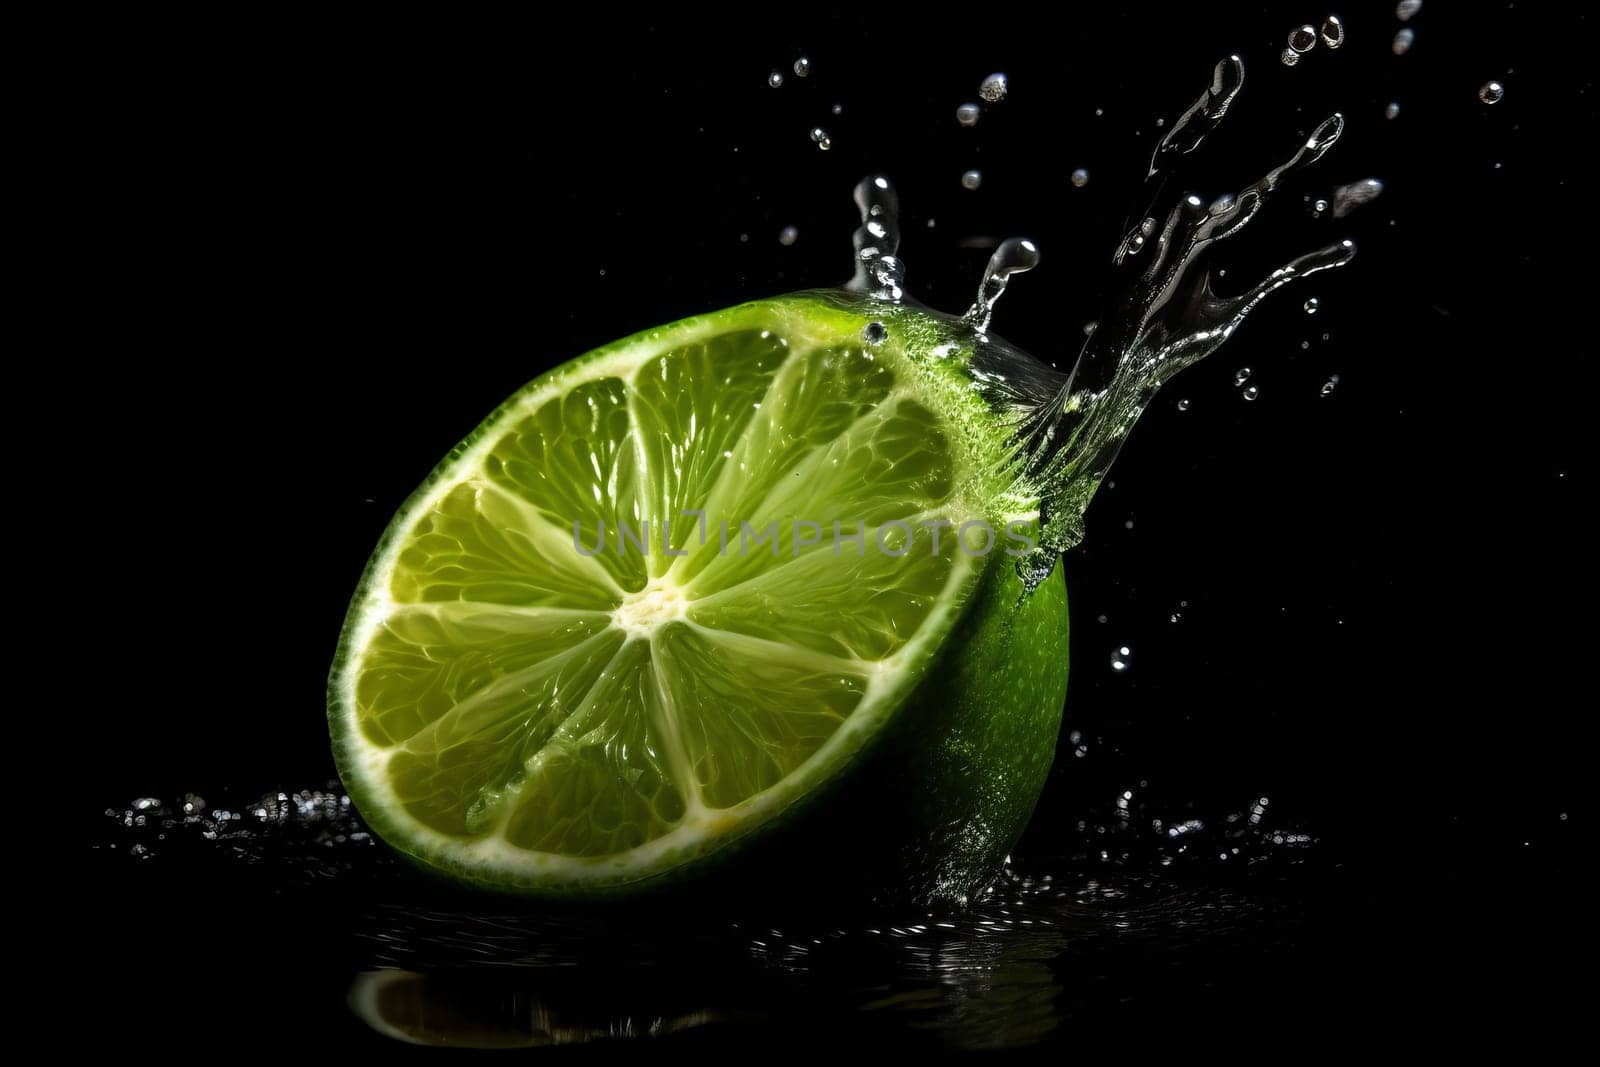 Lime on black background by ylivdesign